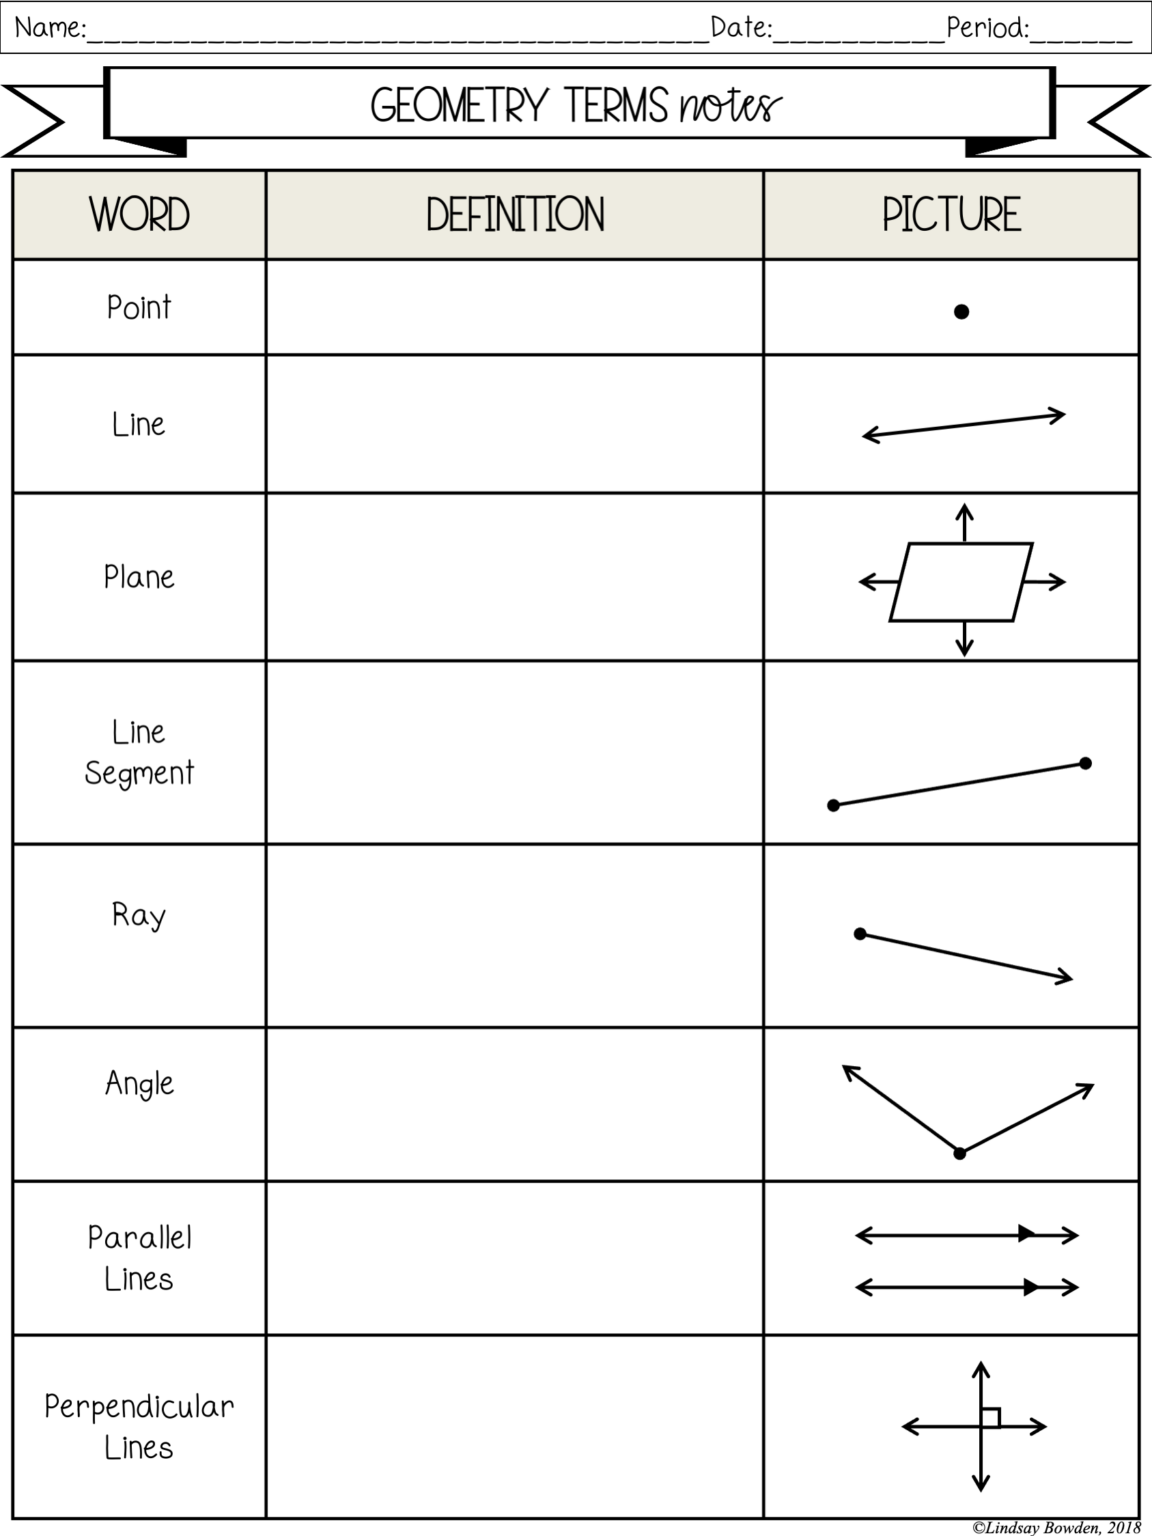 basic-geometry-vocabulary-worksheet-printable-word-searches